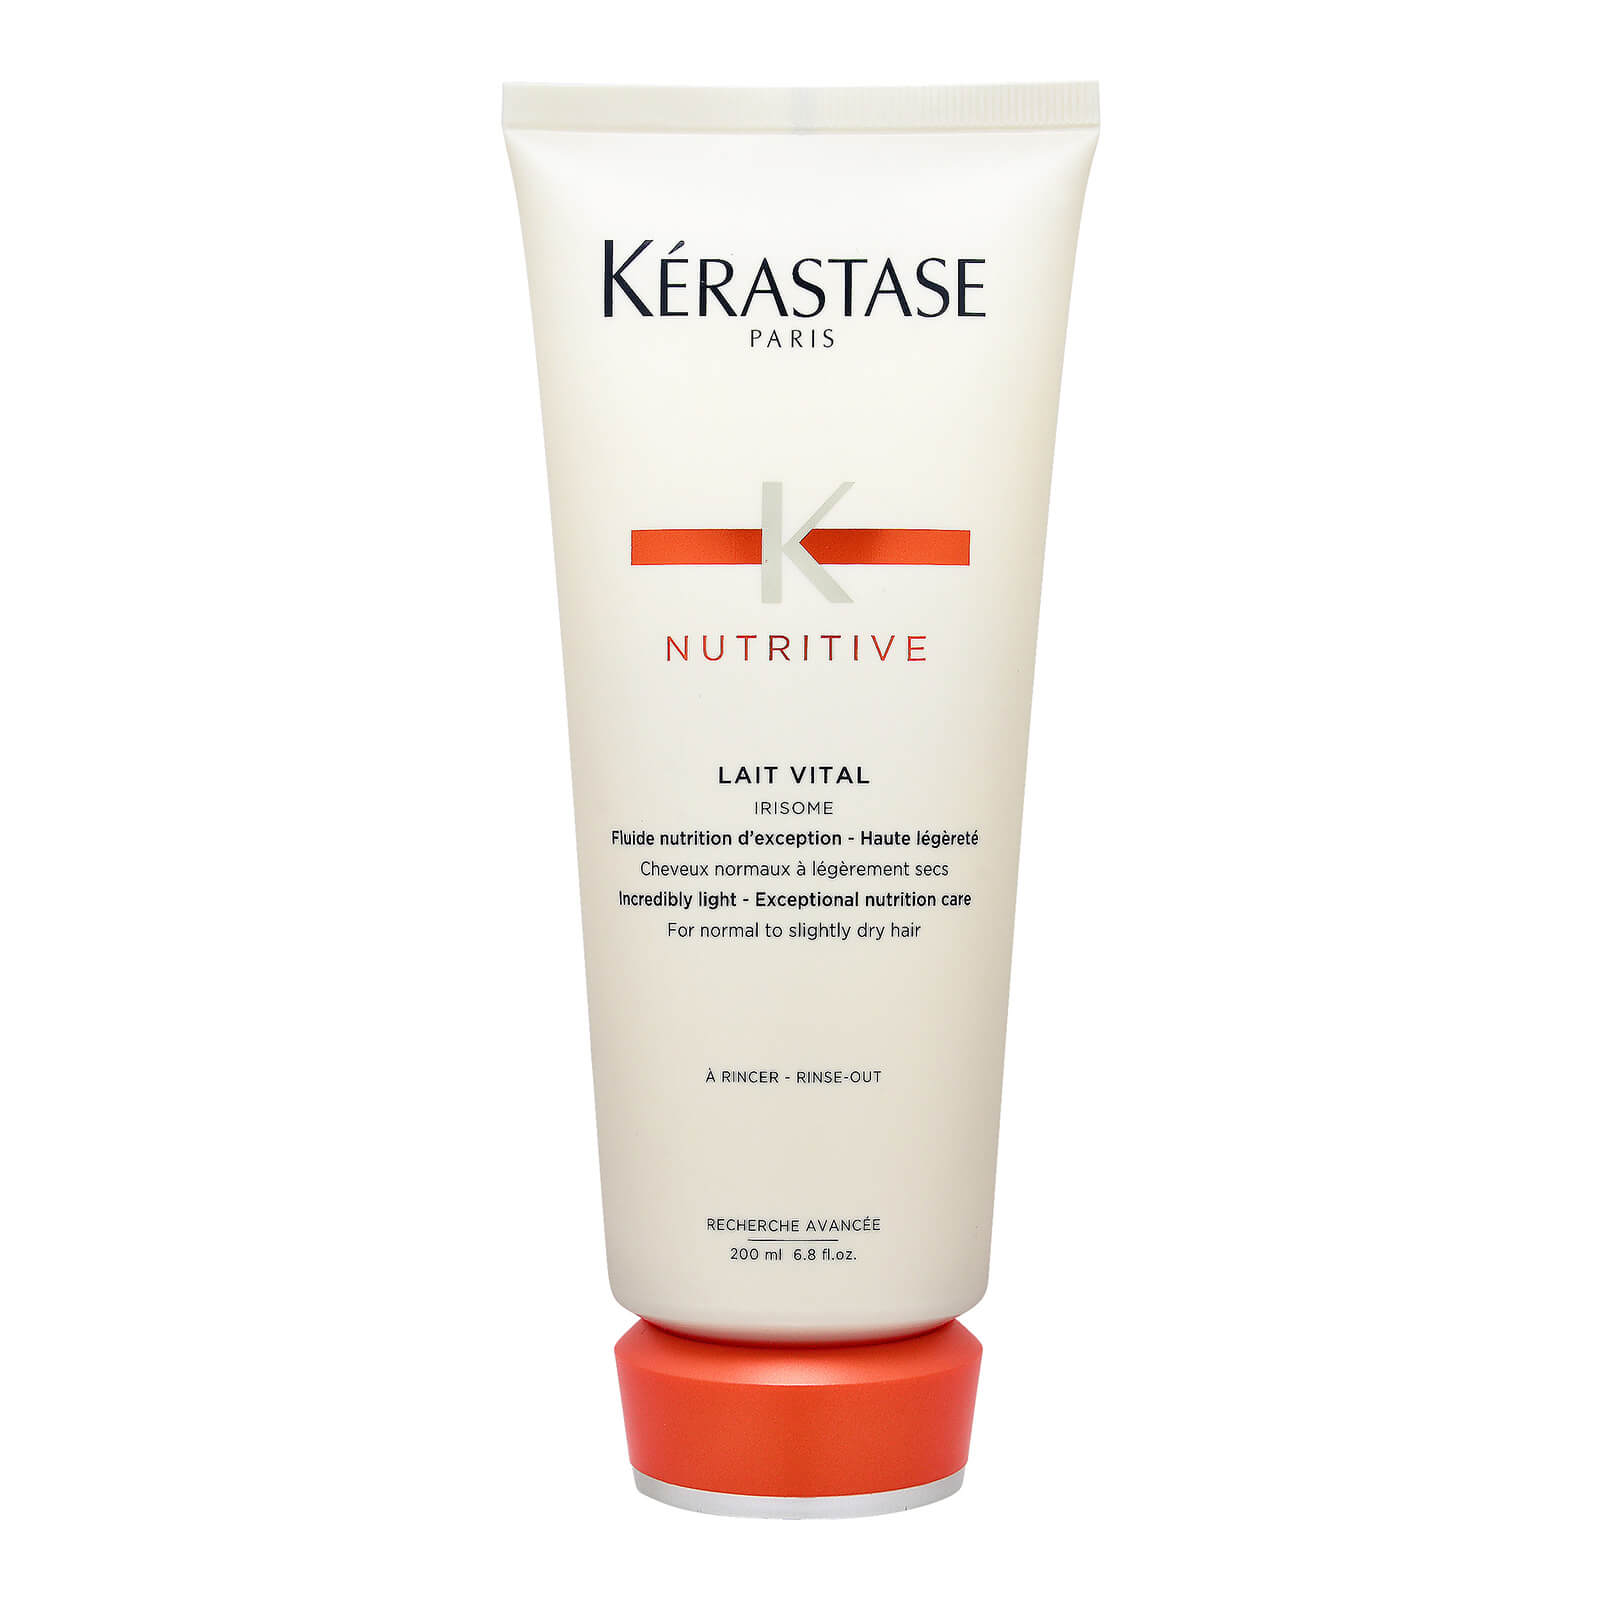 Nutritive Lait Vital Irisome Incredibly Light - Exceptional Nutrition Care (For Normal to Slightly Dry Hair)